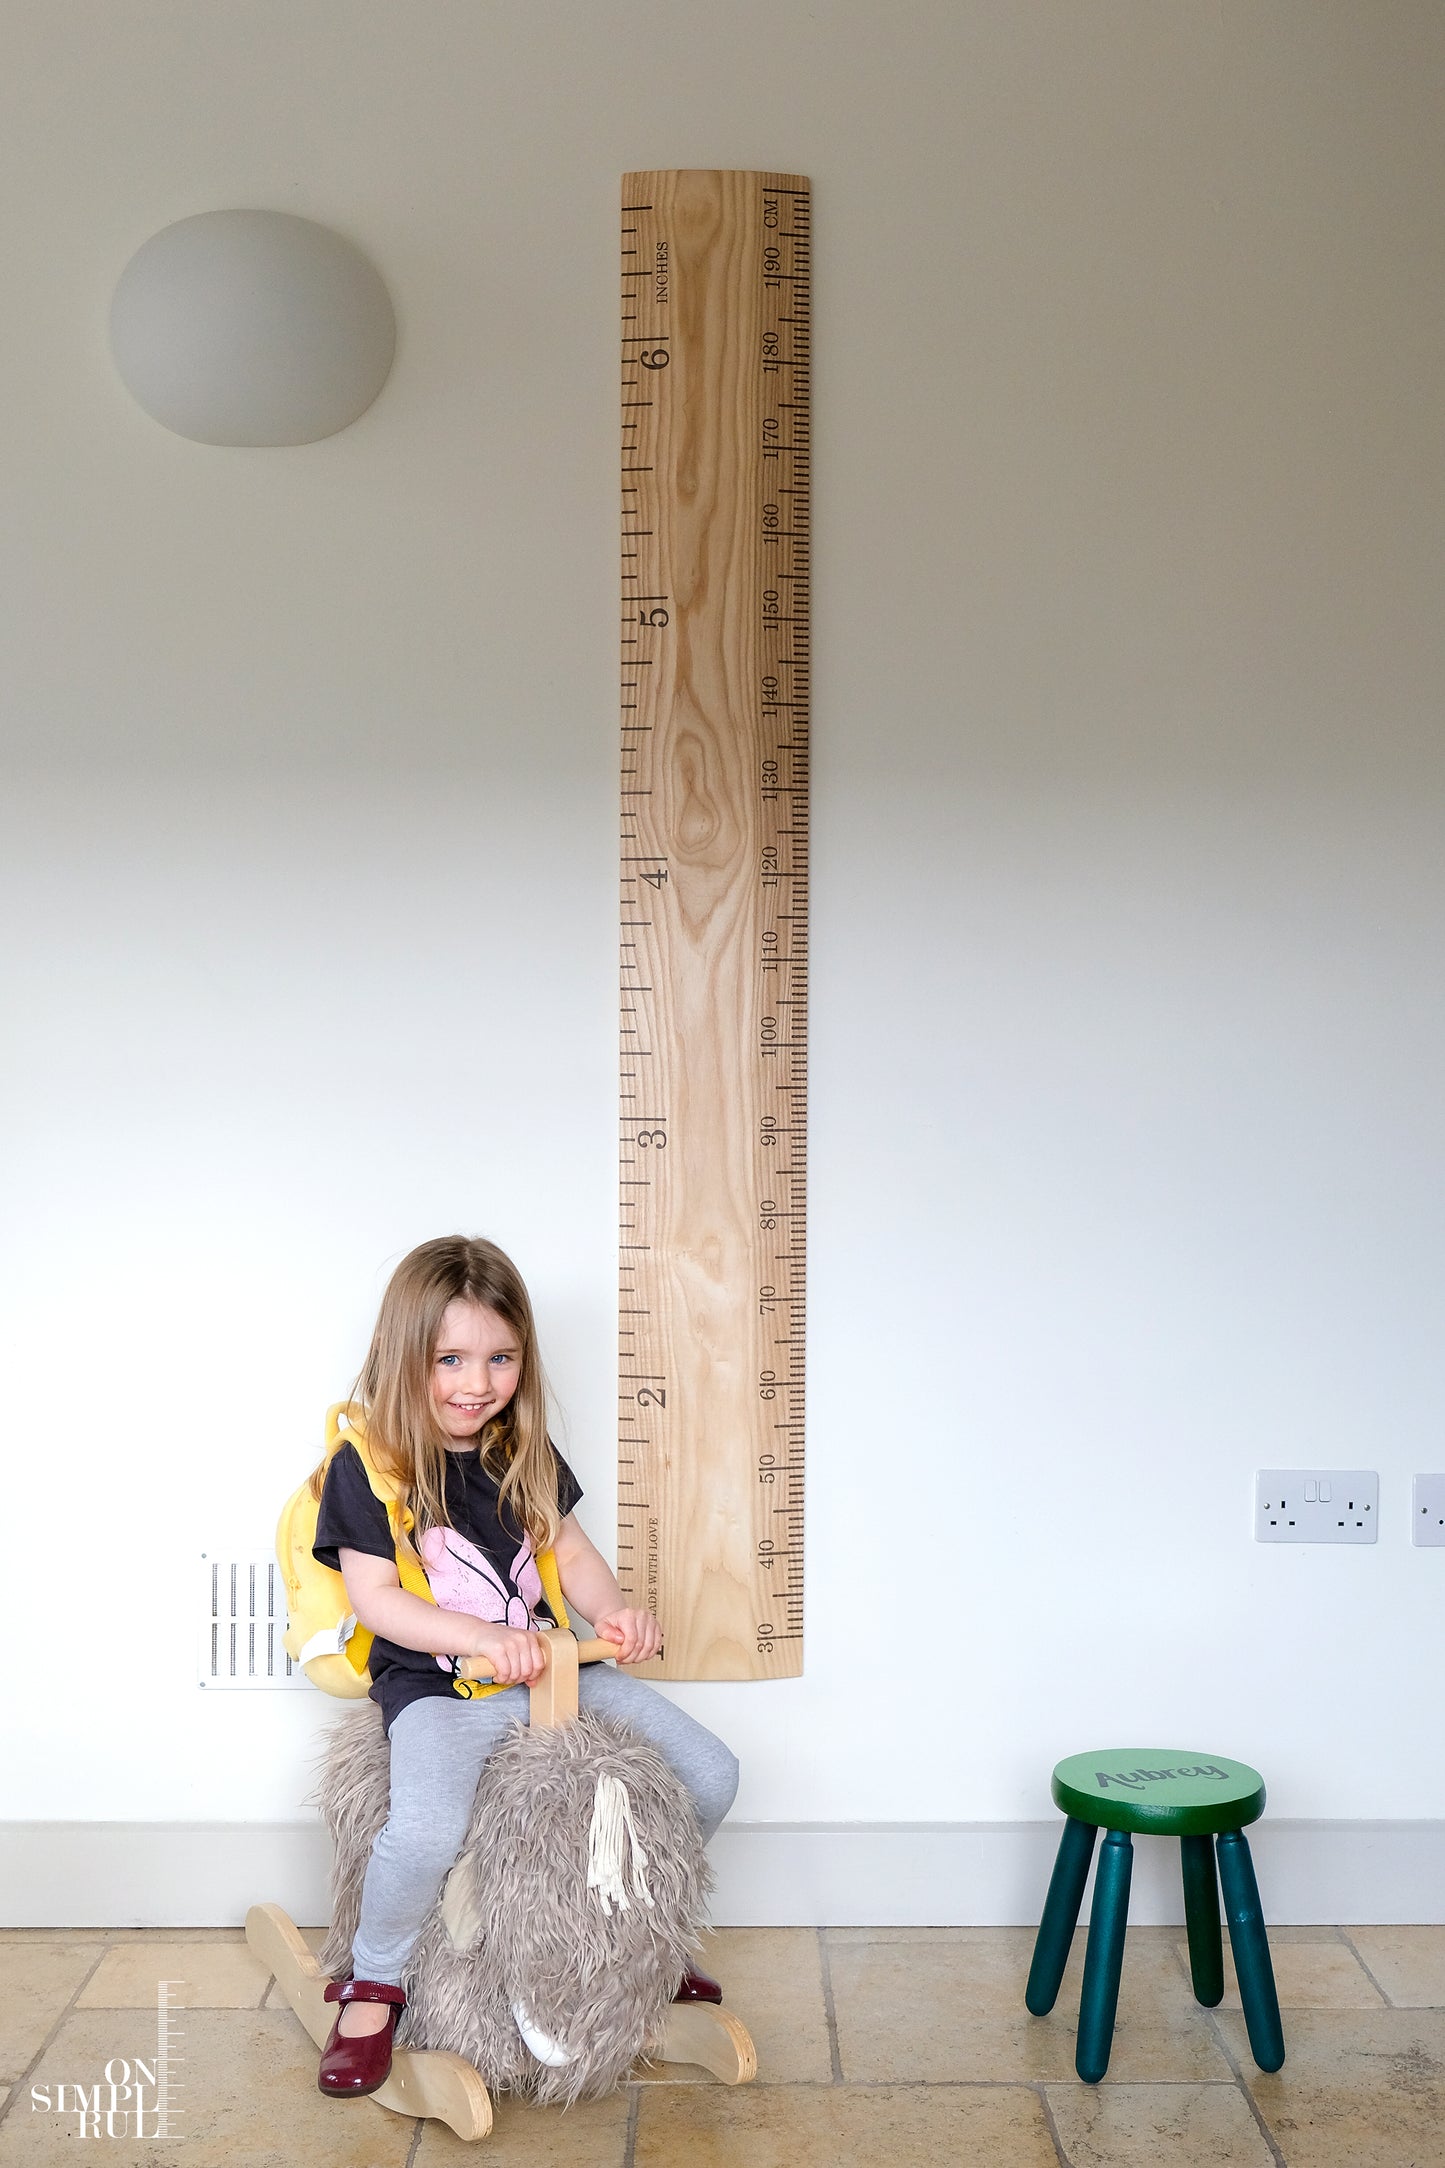 The Premium One Solid Ash Wood Ruler